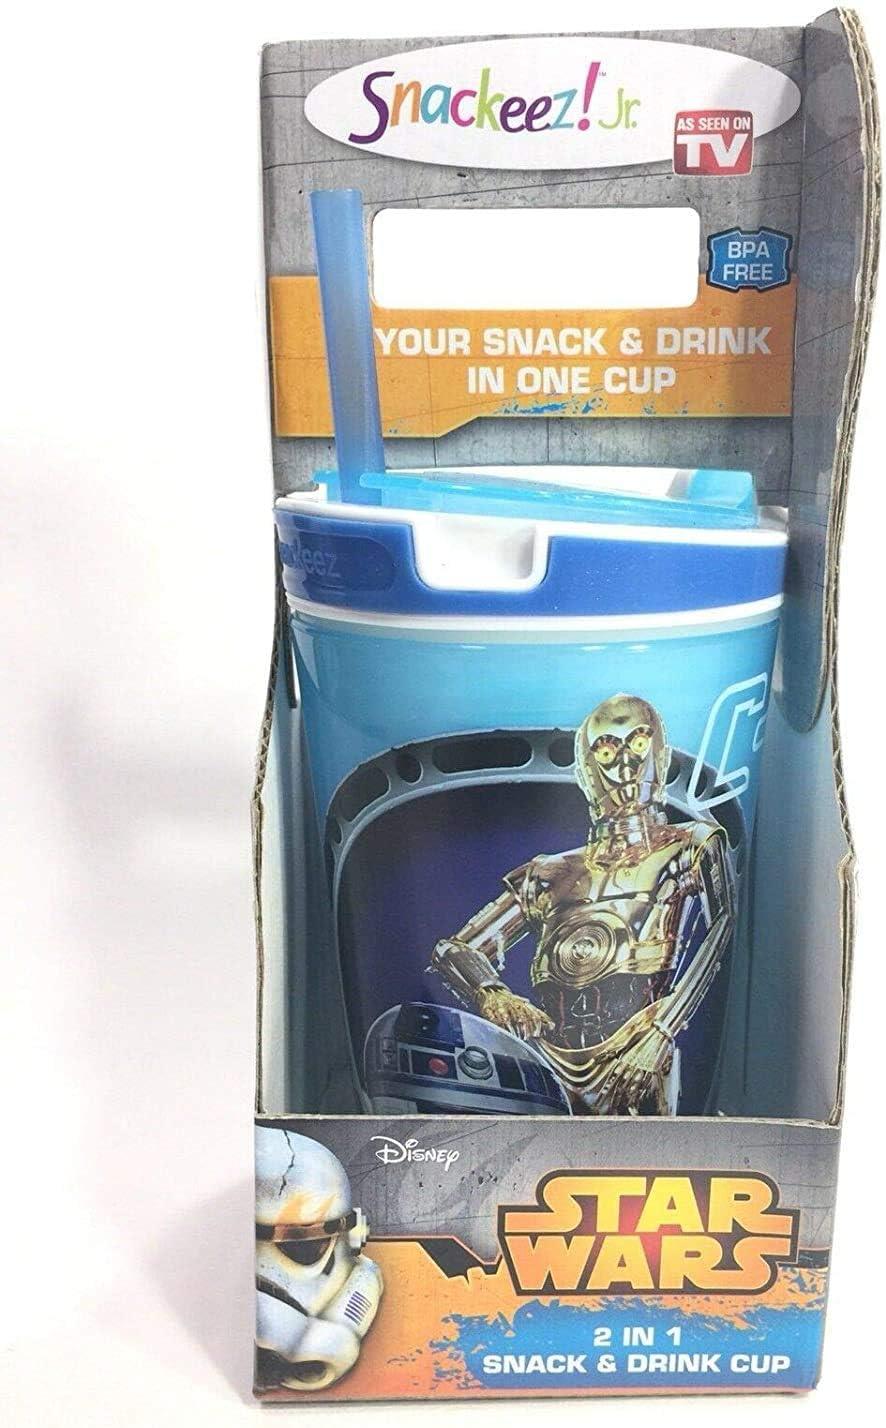 Snackeez Jr - 2-in-1 Snack & Drink Cup Star Wars 7 Movie Edition (Collage Cup)